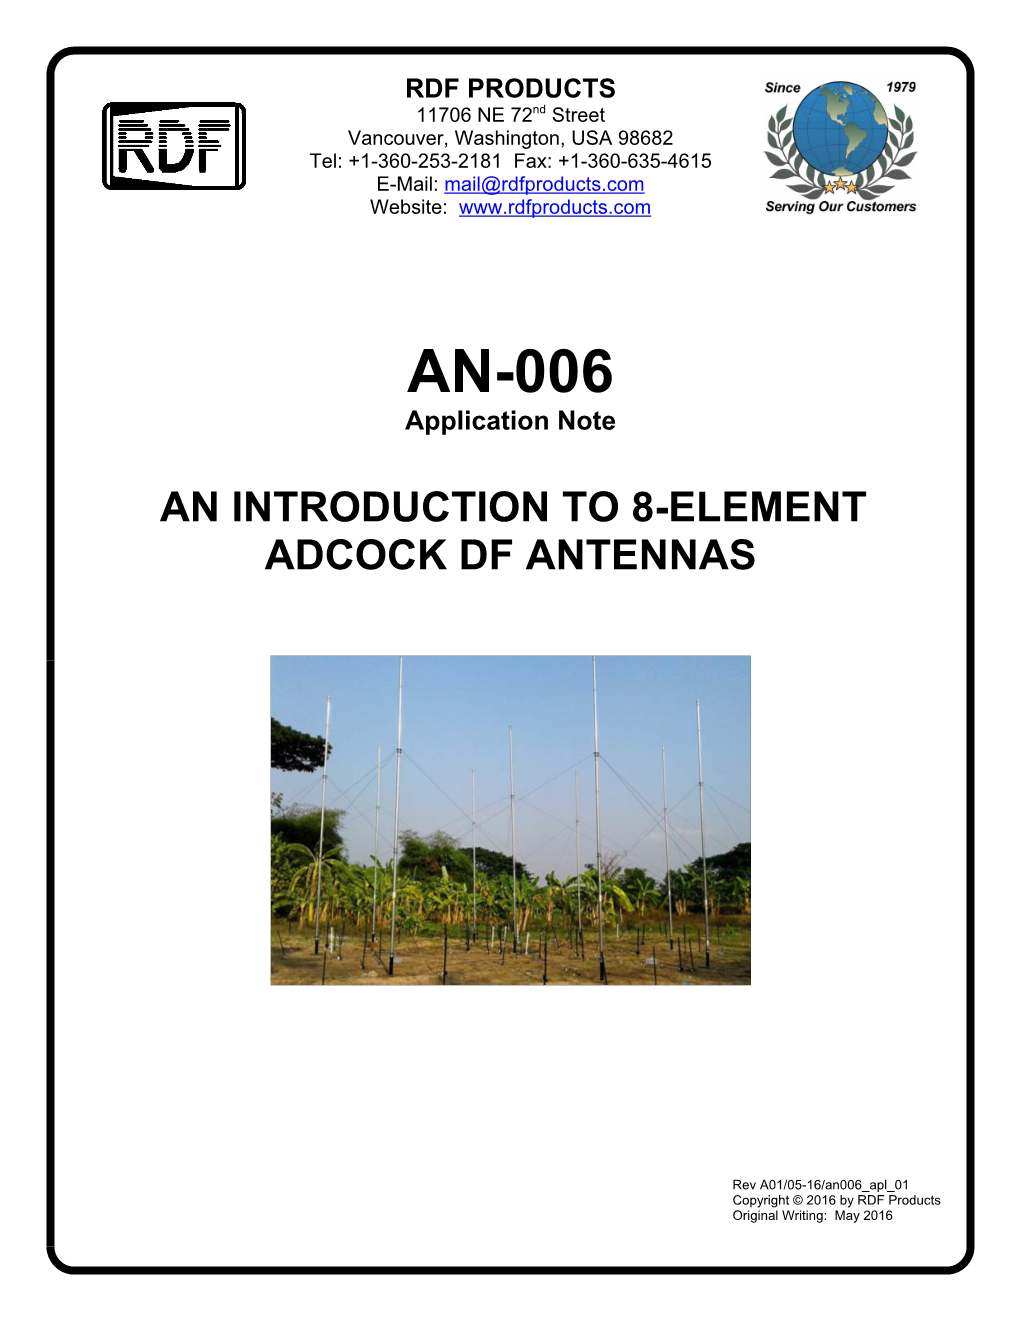 AN-006 Application Note